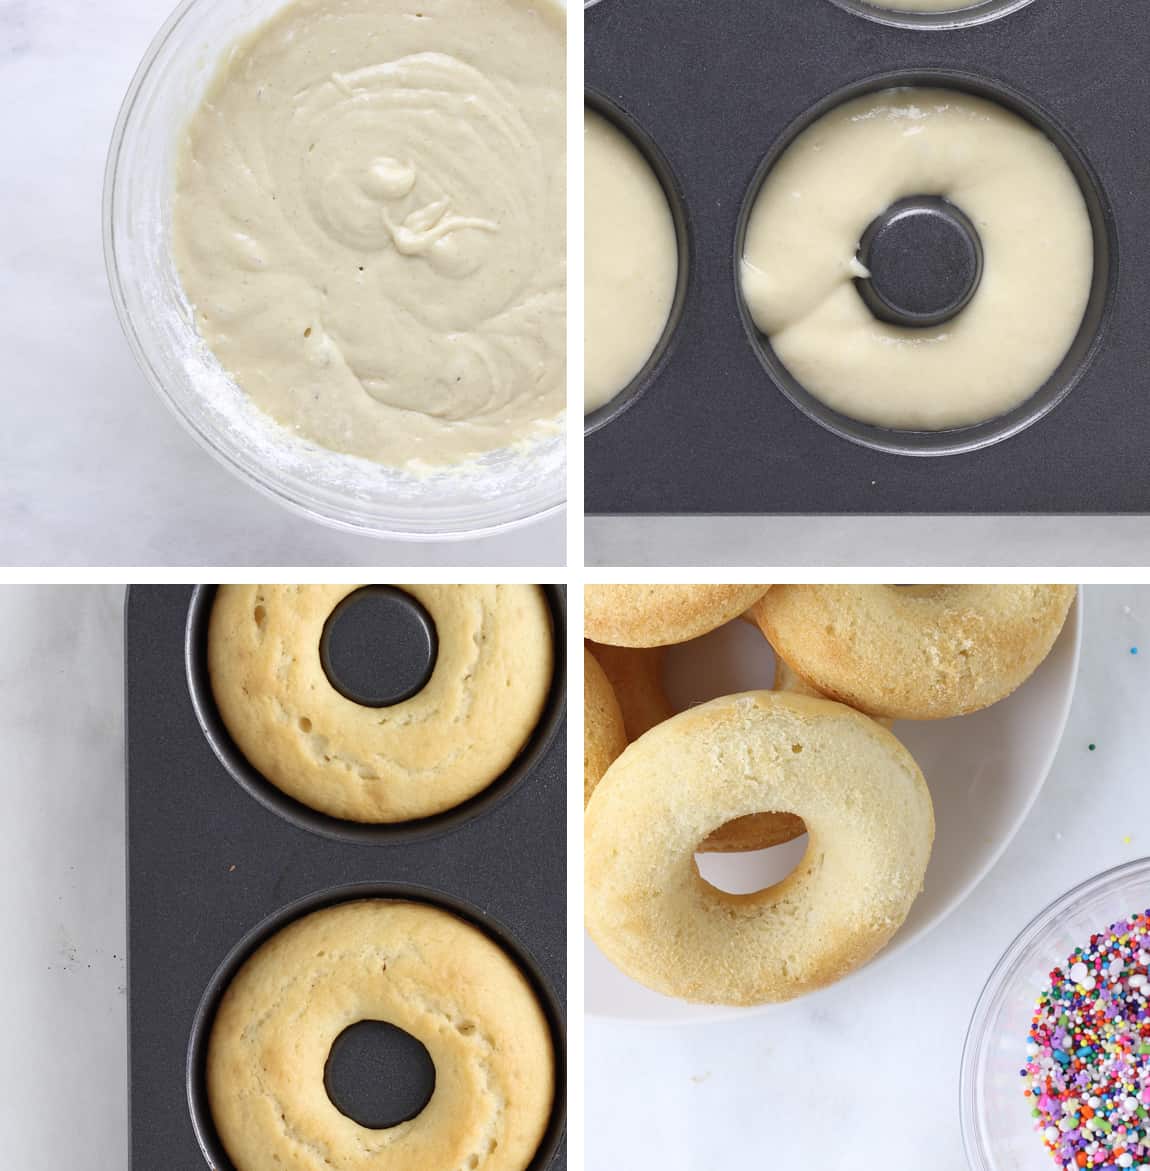 Step by step to make baked birthday donuts images.